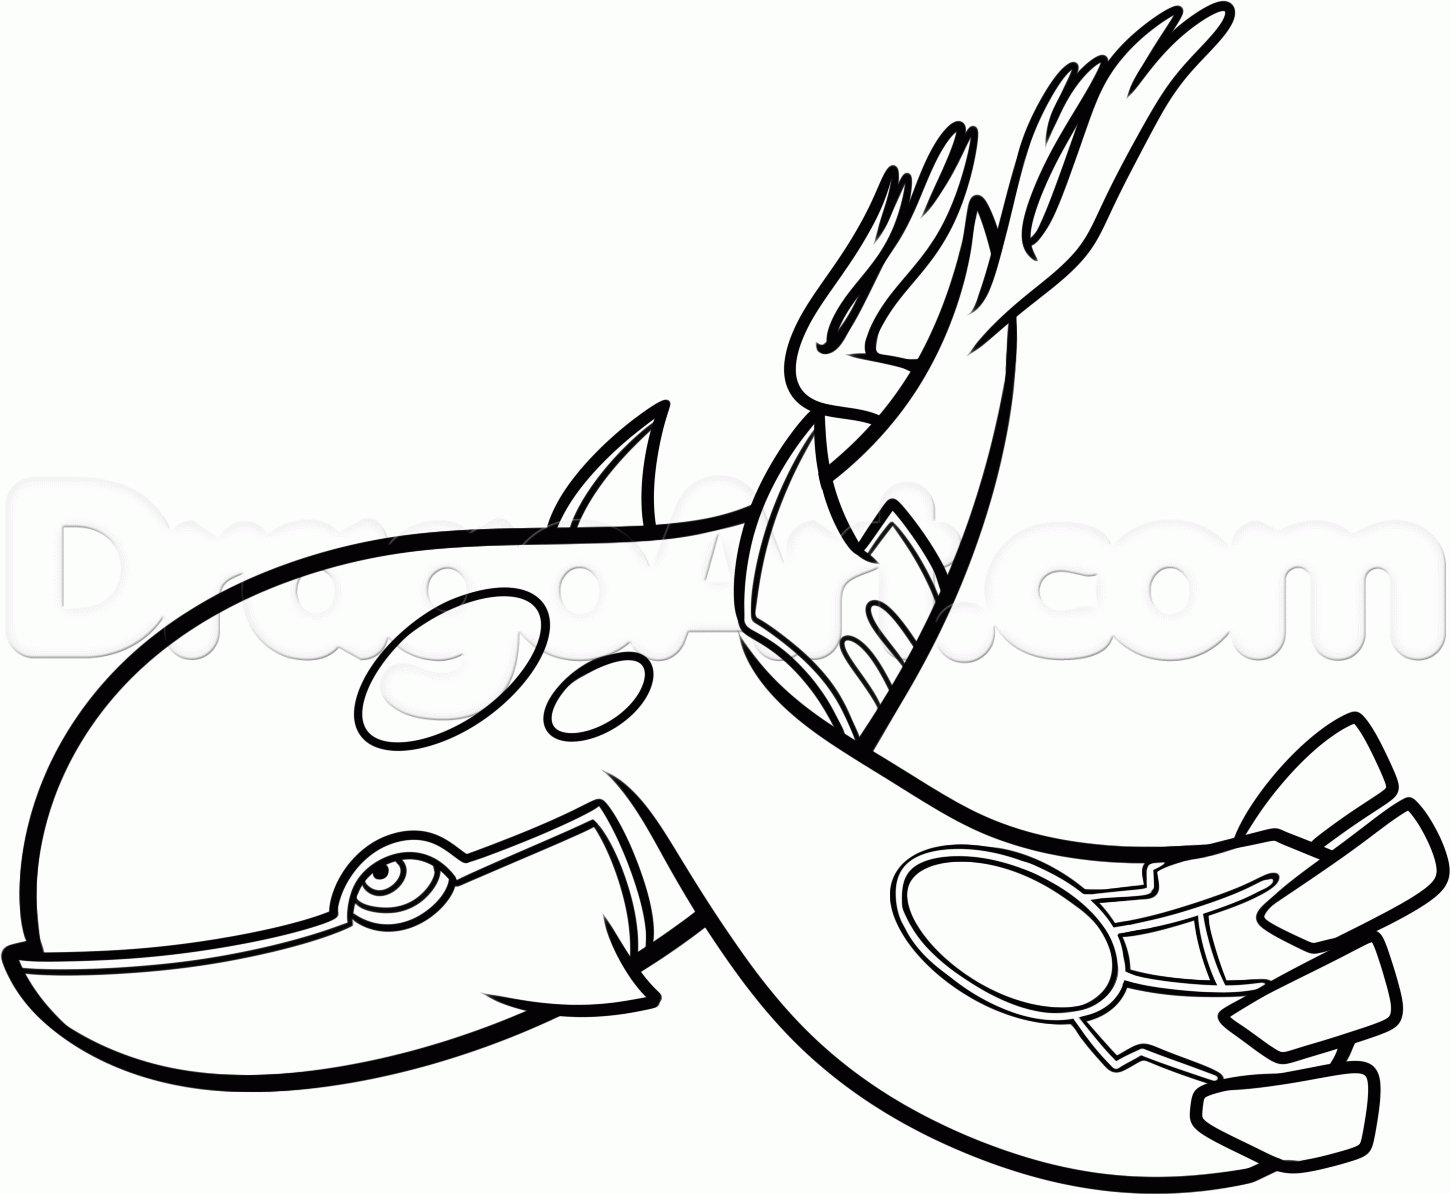 Pokemon Coloring Pages Primal Kyogre Colouring book fun for kidsSubscribe t...